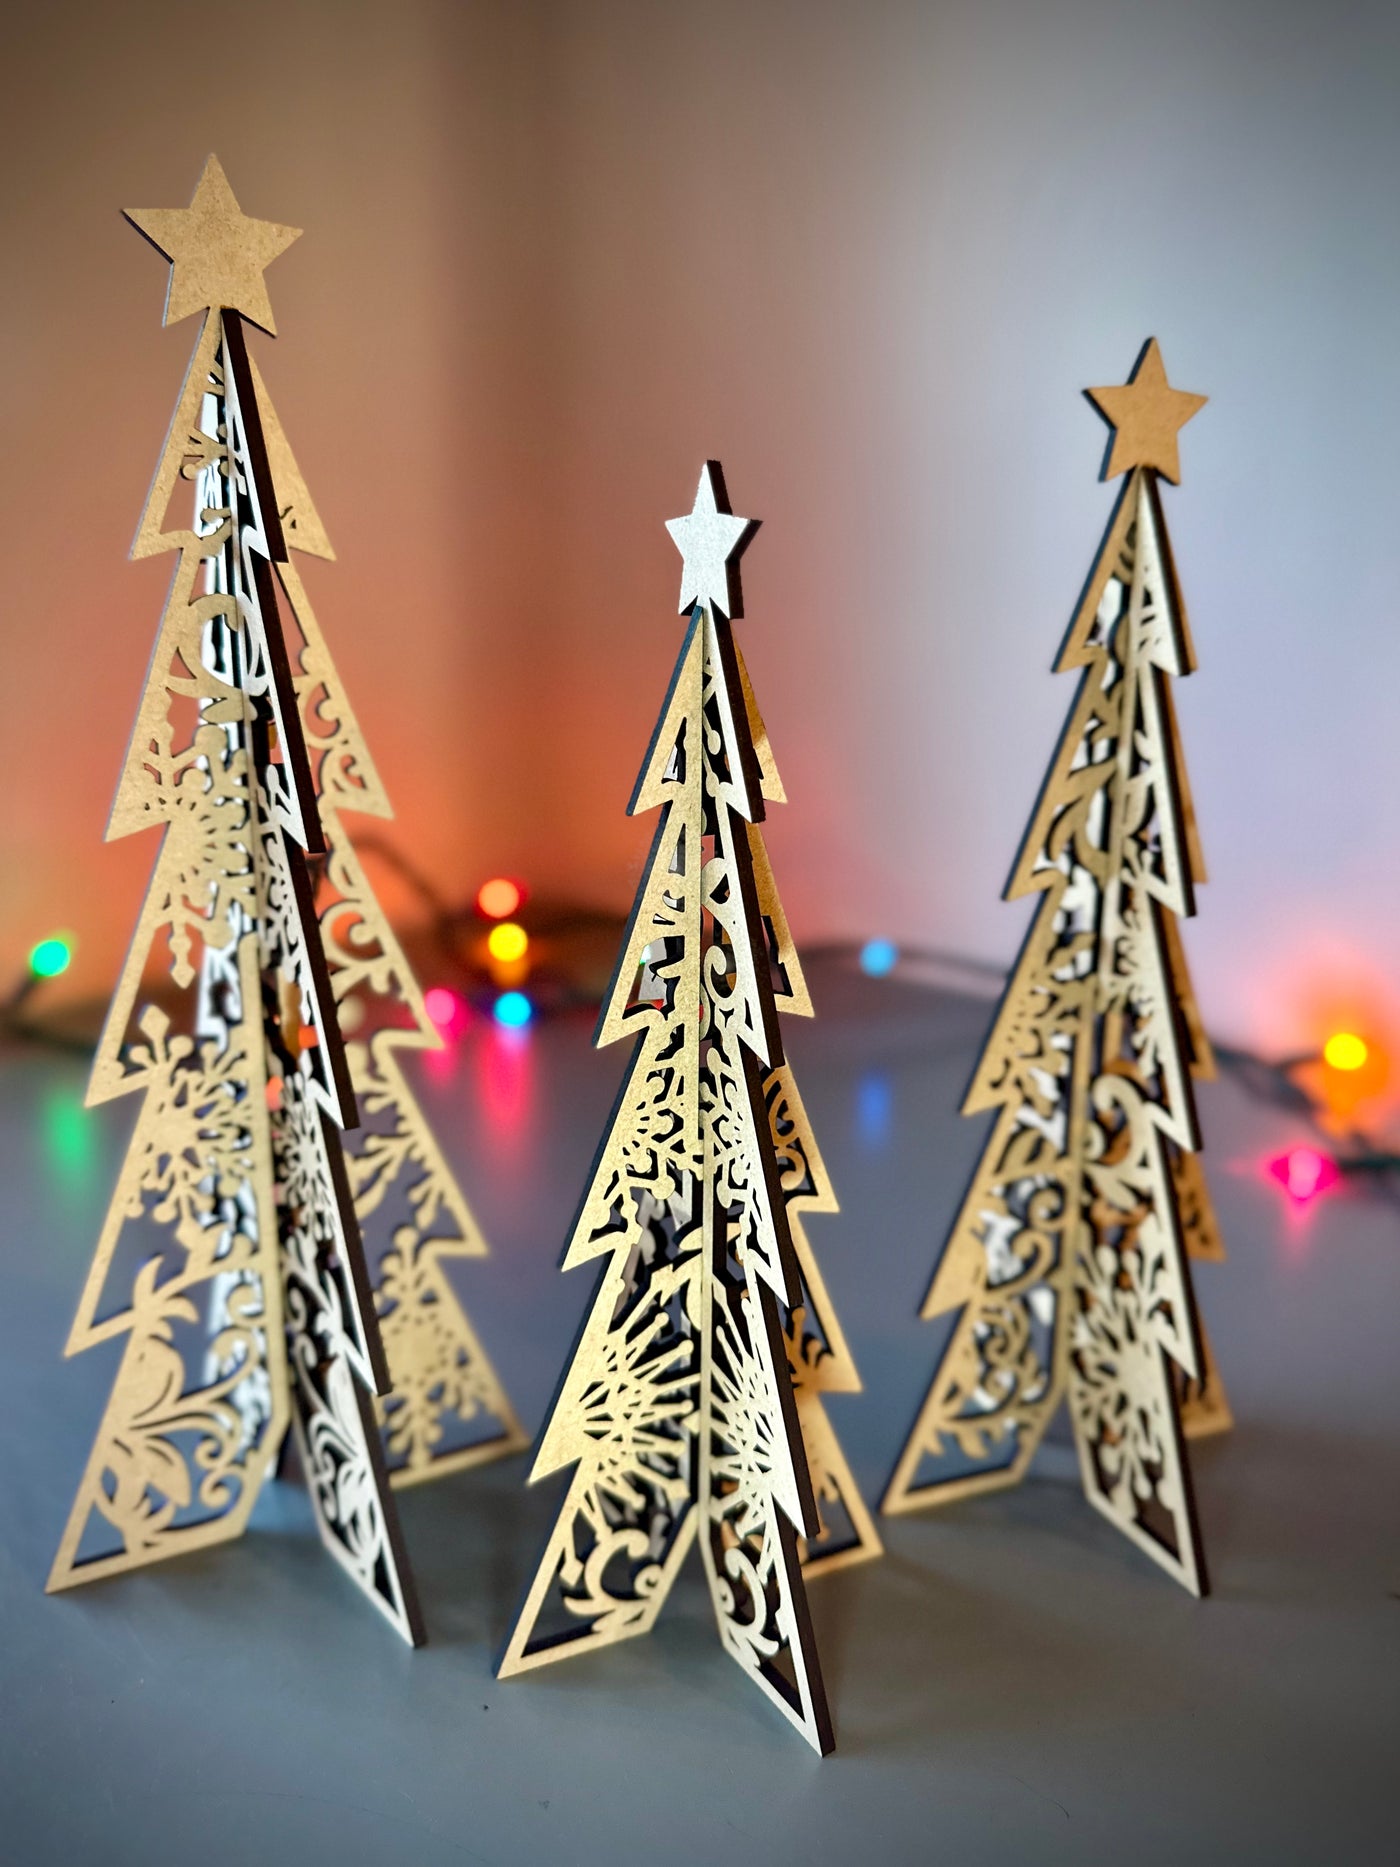 Wooden Snowflake Tabletop Christmas Trees, Set of 3